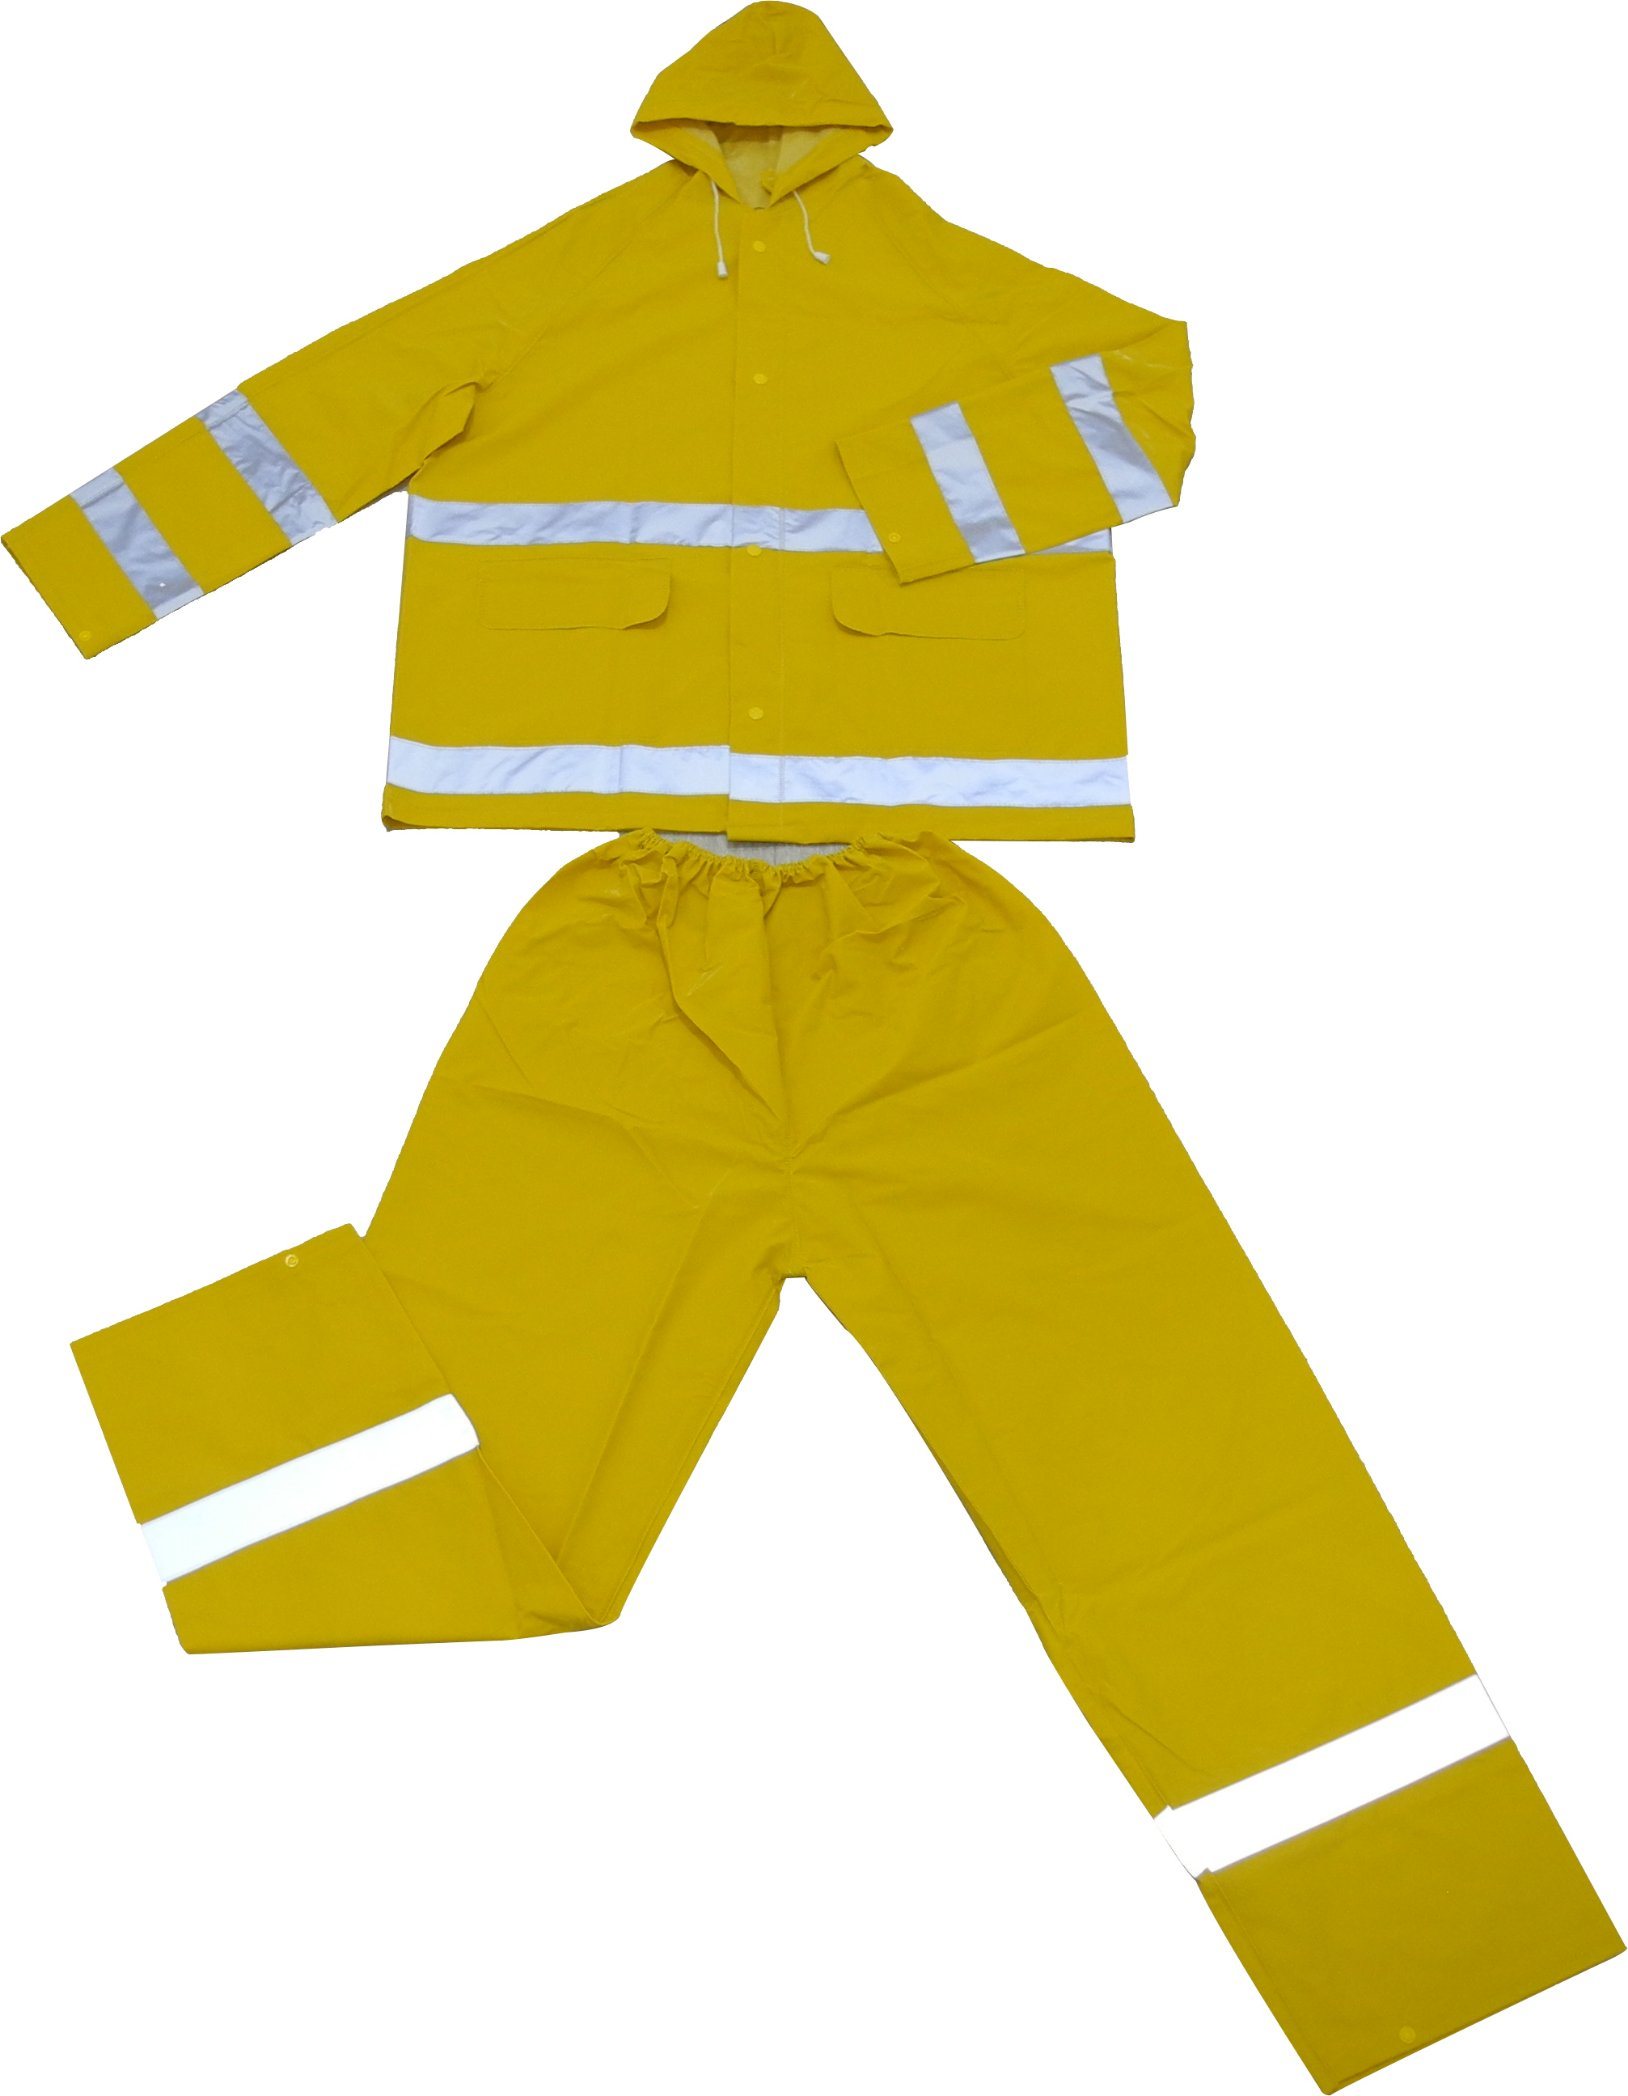 Rainsuit with Hoods and Reflective Ribbon